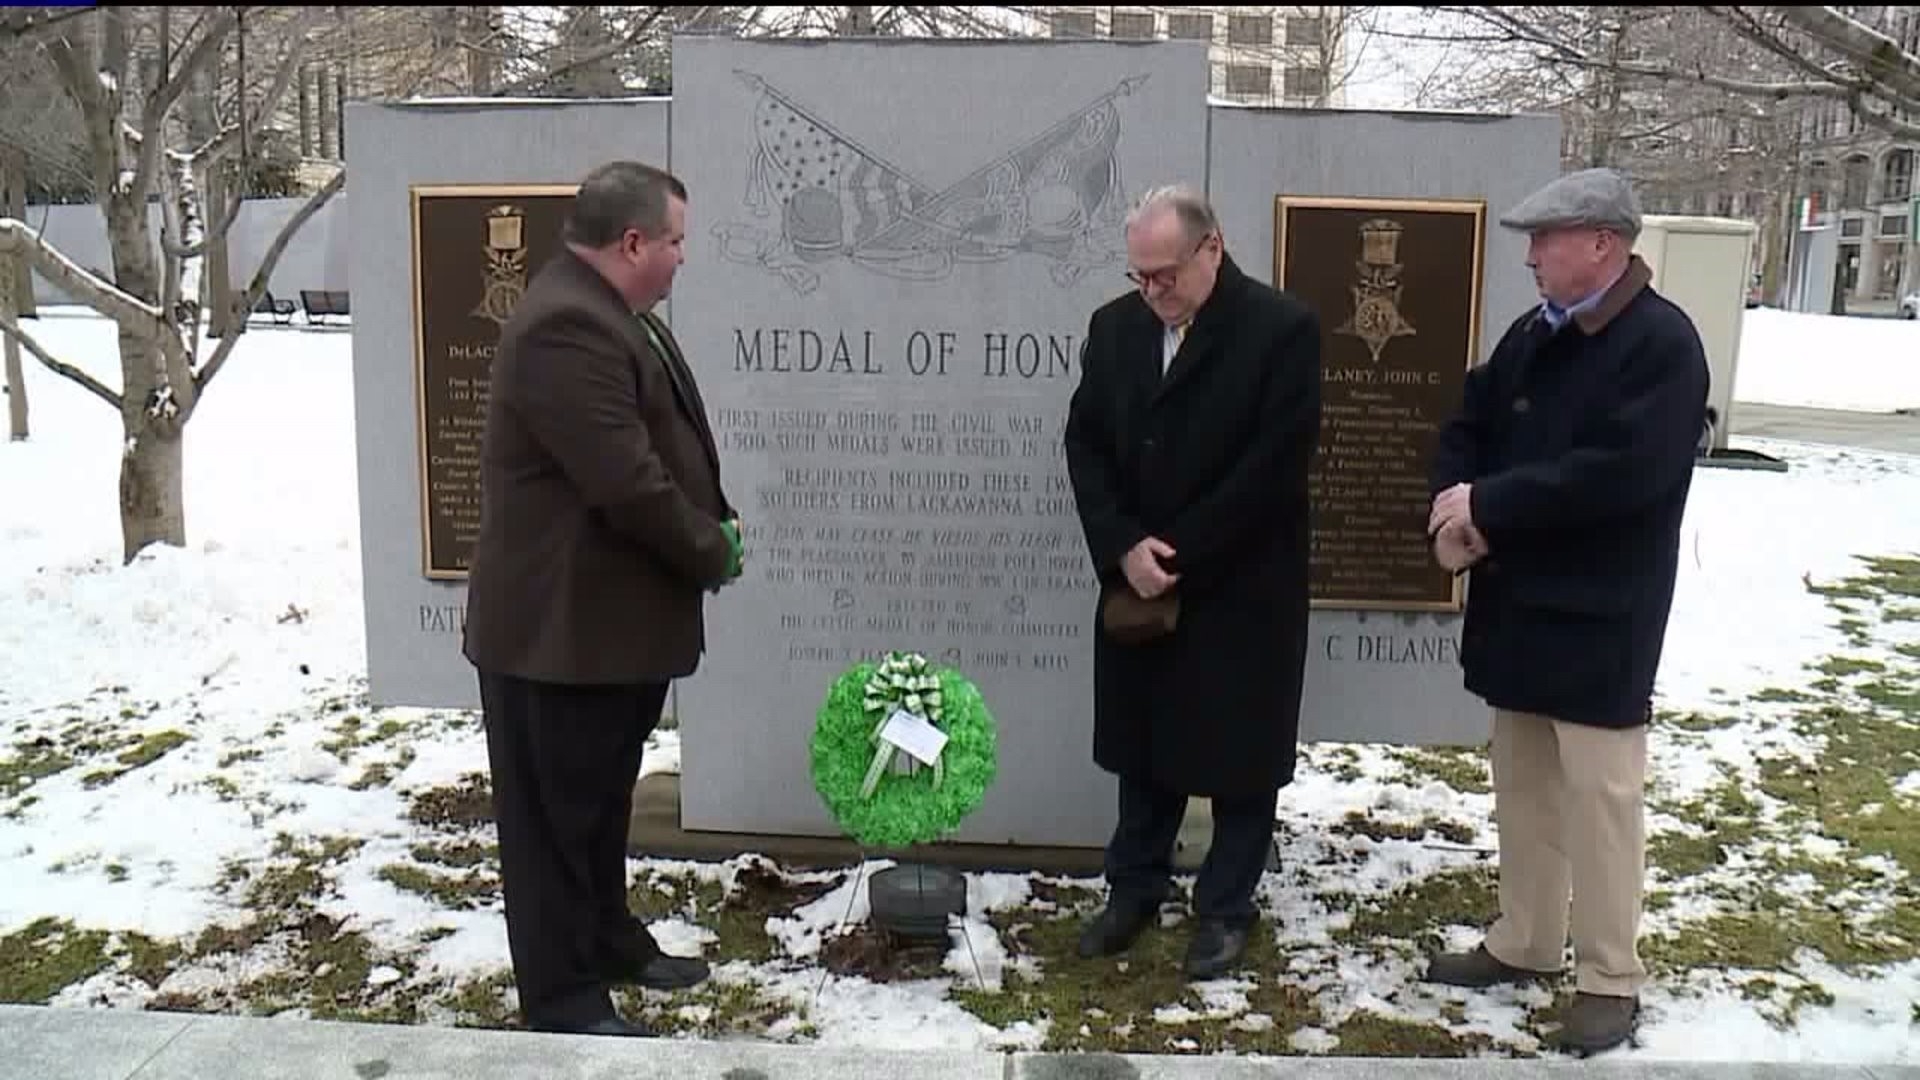 Wreath Laying at Courthouse Square Honors Irish Heritage